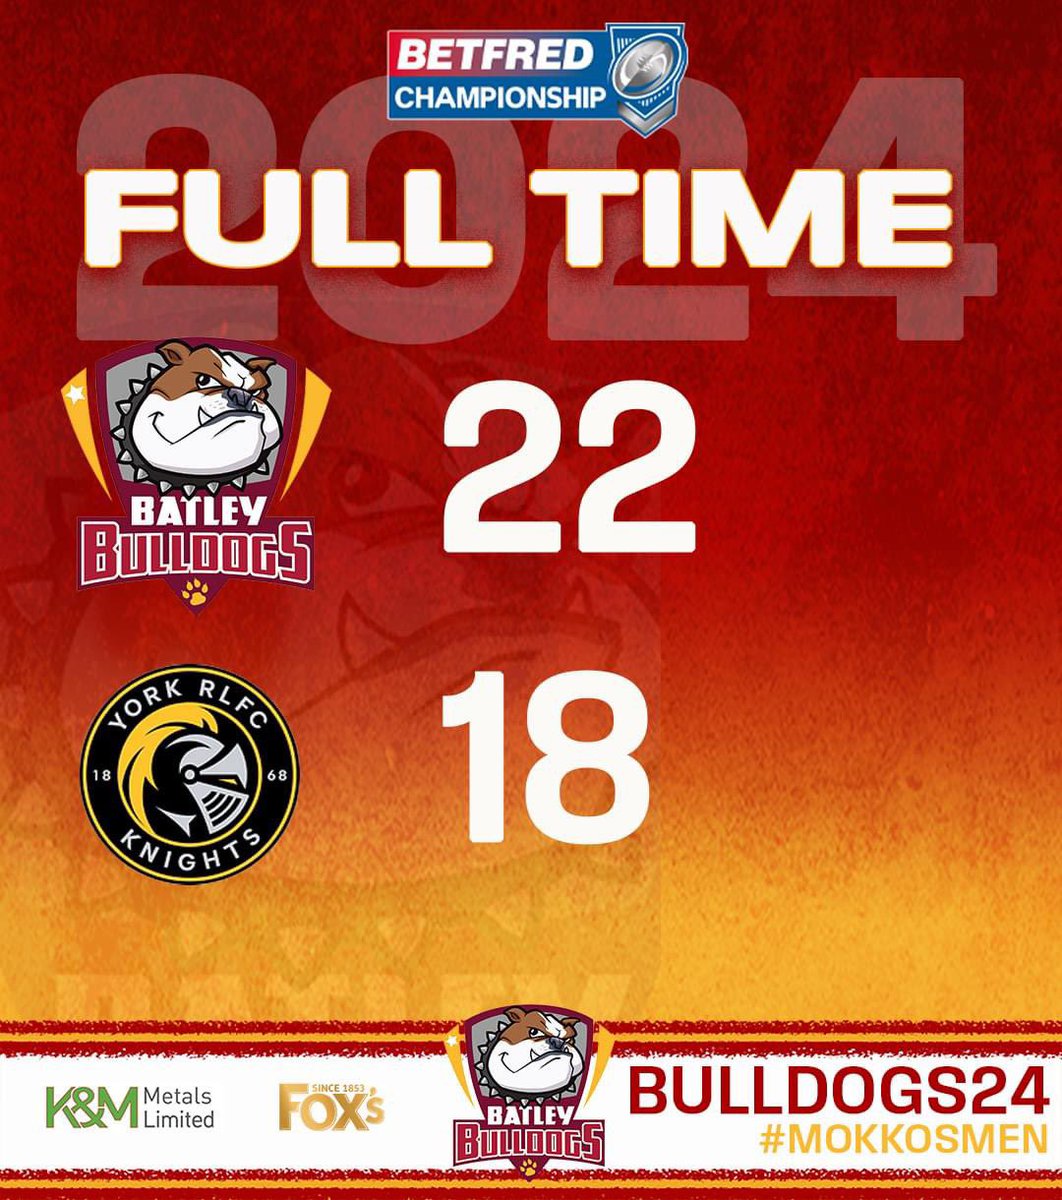 FULL TIME | The boys stand strong to protect their lead and it’s back to winning ways for #MOKKOSMEN! 🐶 22 ⚪️ 18 Thank you for your support! #COYD #UTD 🐶